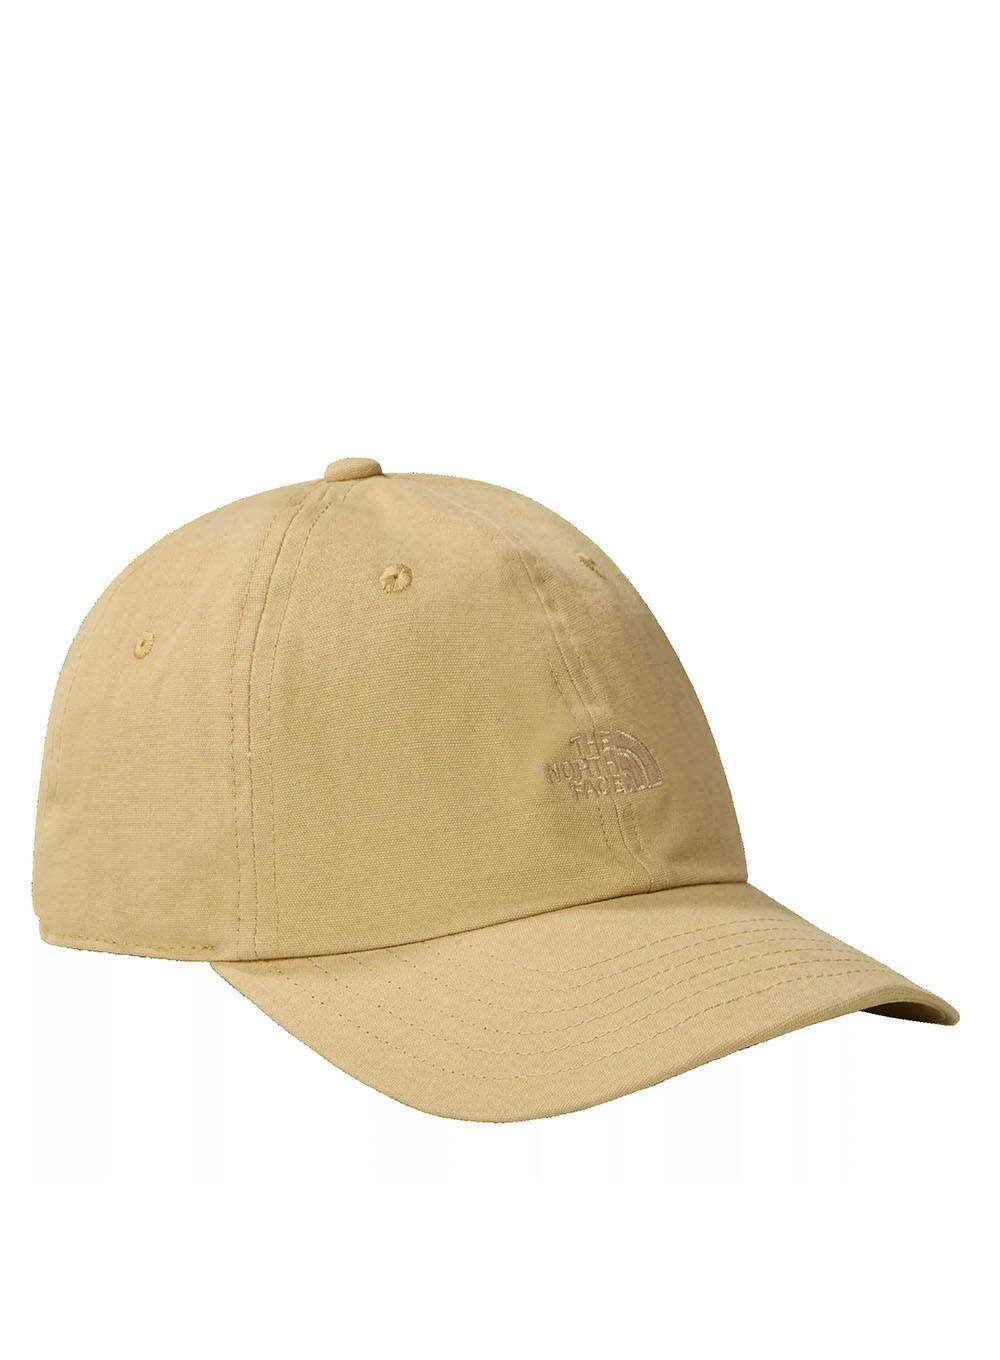 Czapka The North Face Washed Norm Hat - khaki stone